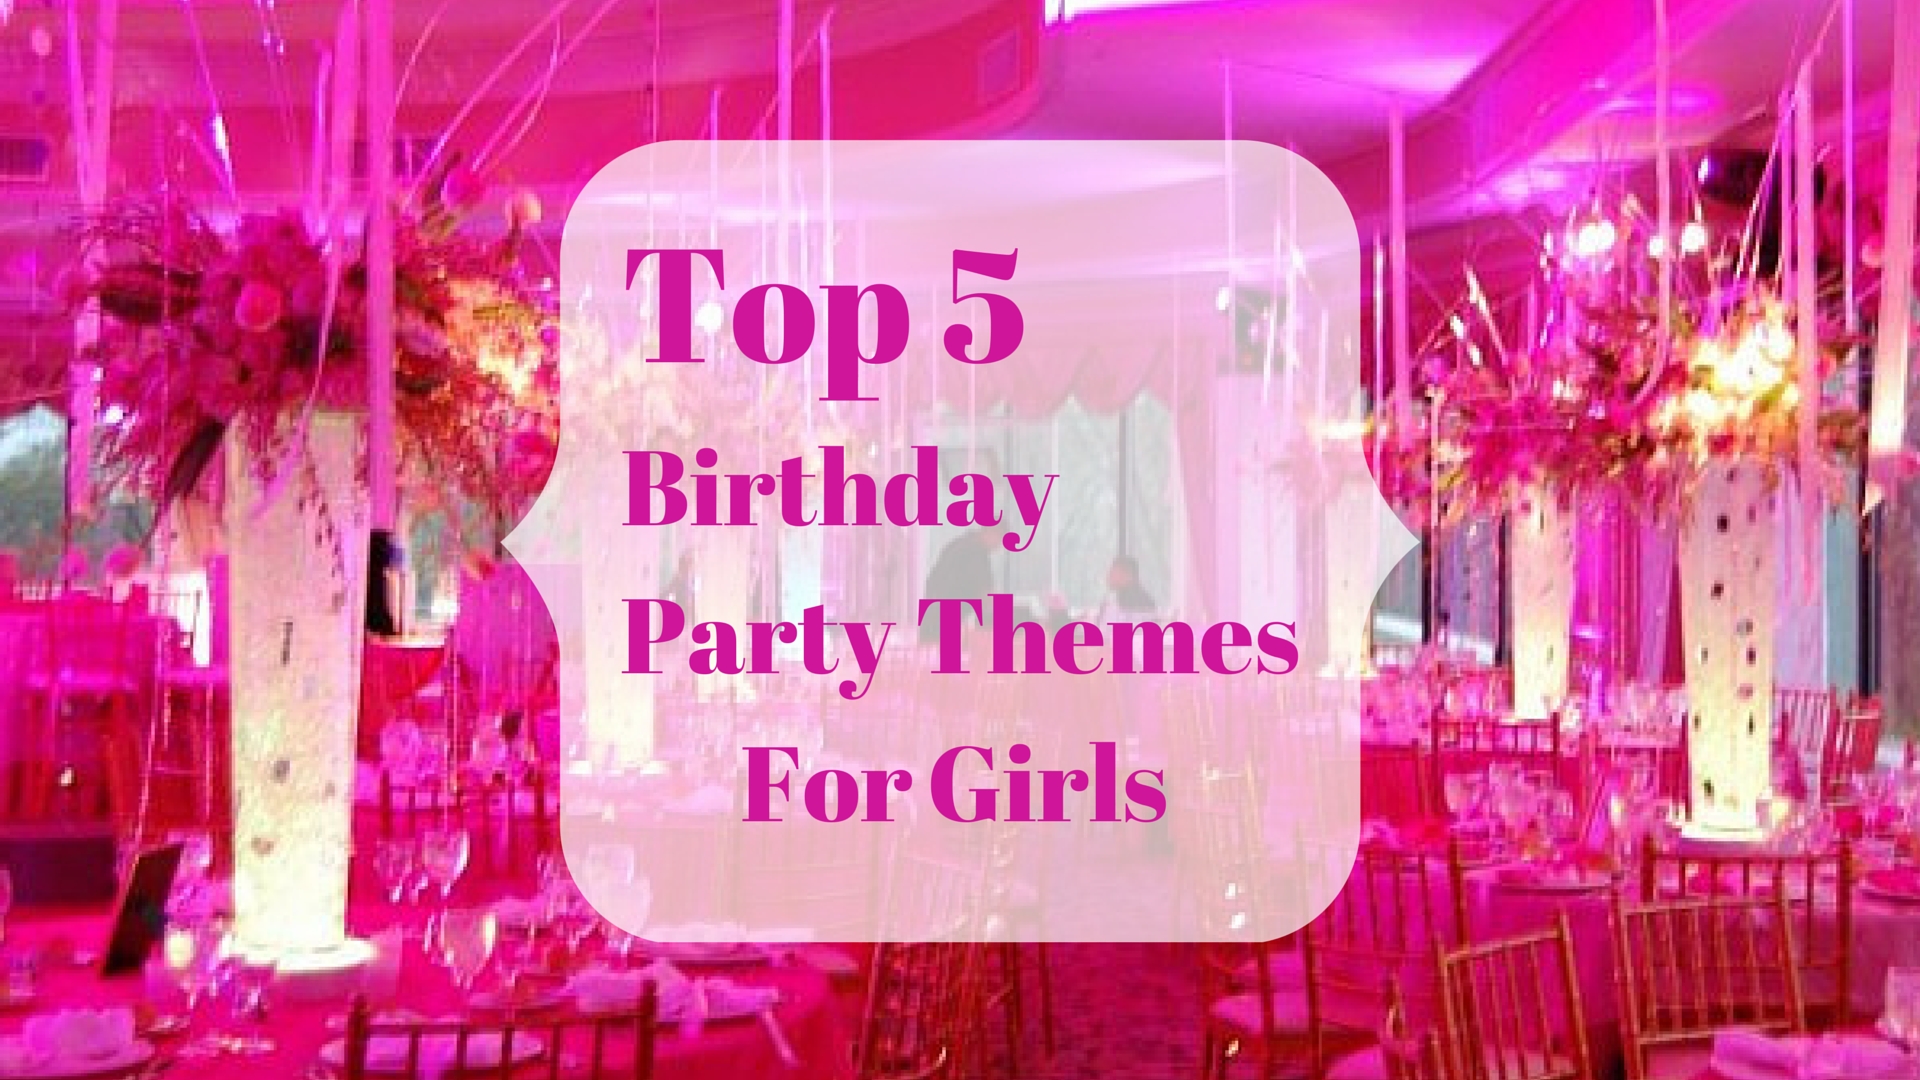 10 Stylish Birthday Party Ideas For 2 Year Old Girl top 5 birthday party themes for girls 11 2022